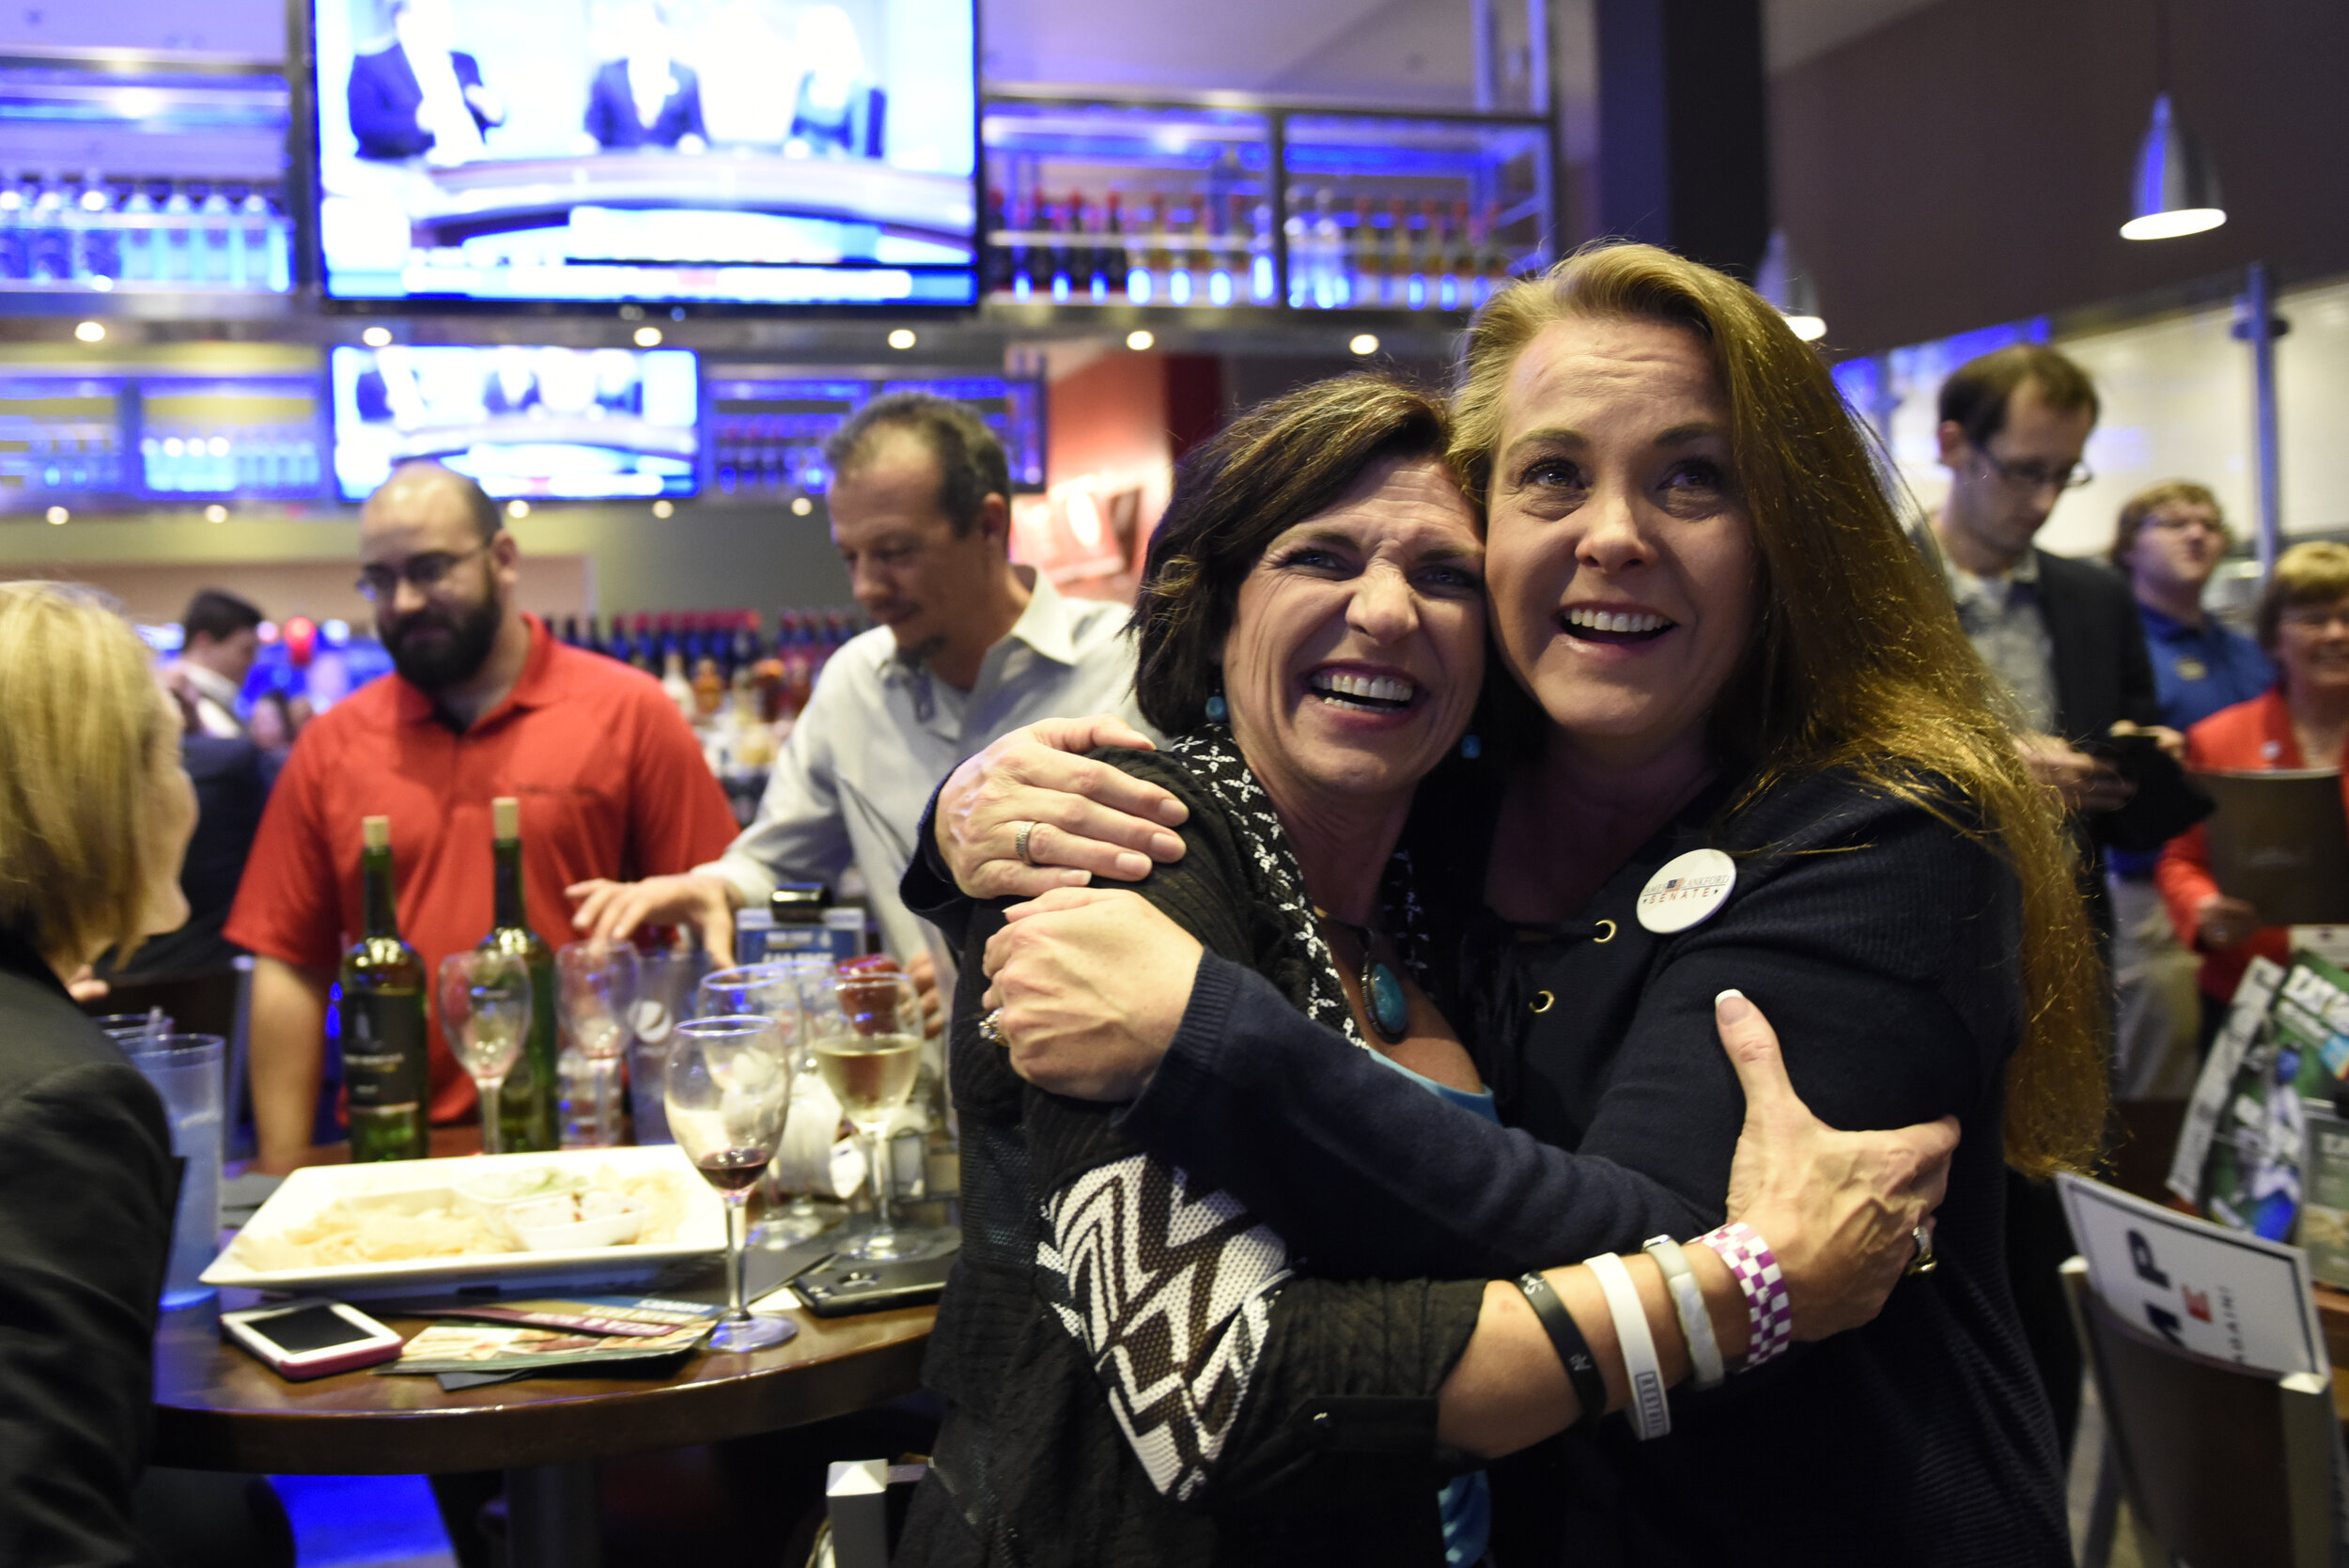  Chandra Ford (L) and Tempe Perreira celebrate as Republican presidential nominee Donald Trump is announced the winner of Ohio at the Oklahoma GOP watch party in Oklahoma City, Oklahoma, U.S. November 8, 2016.  REUTERS/Nick Oxford 